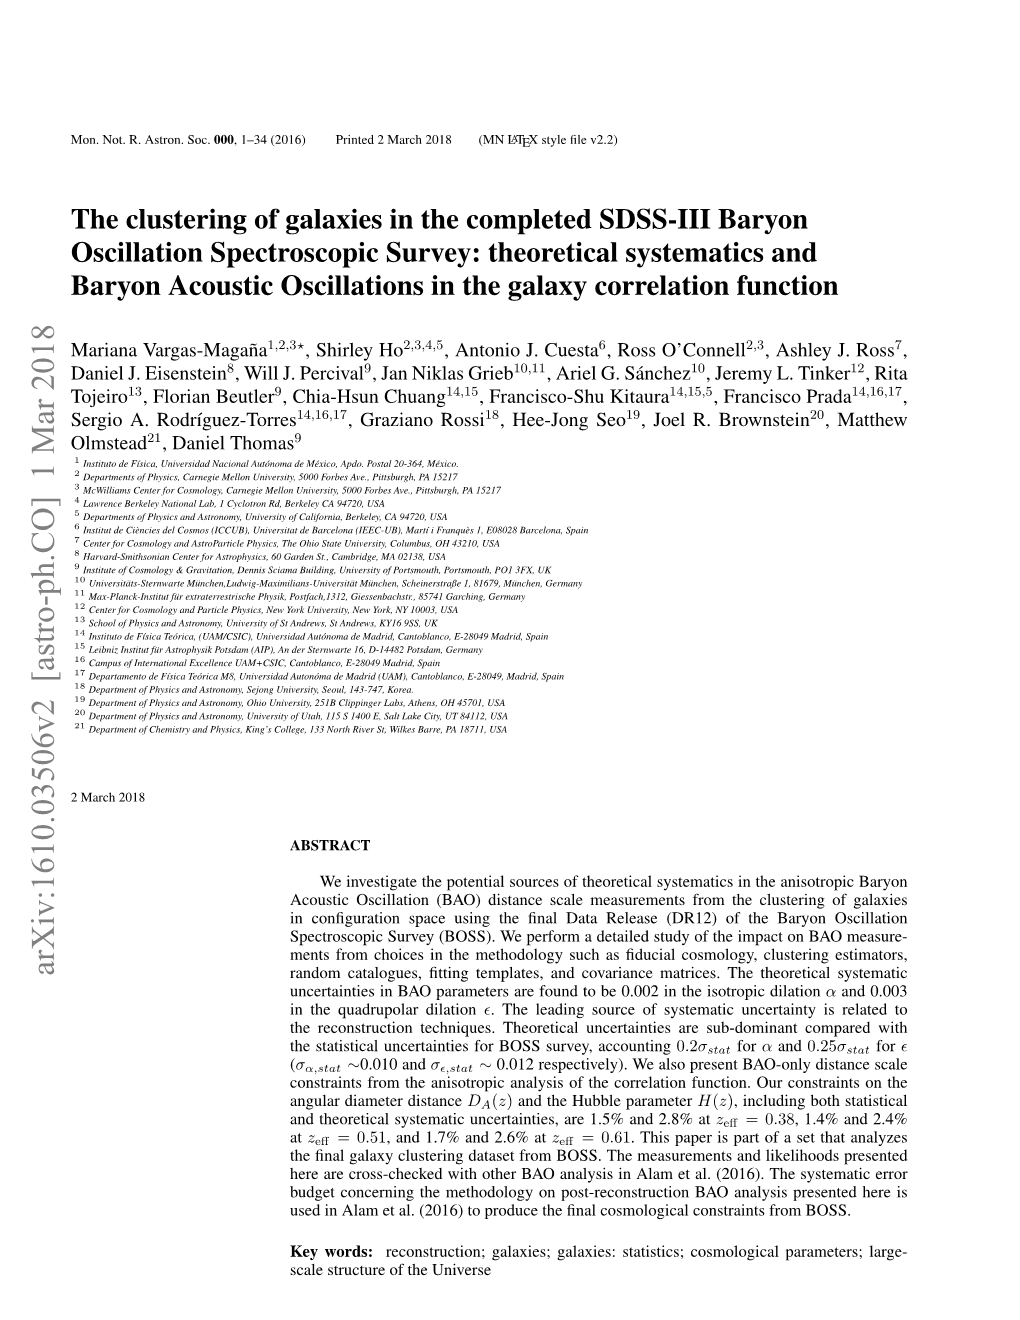 The Clustering of Galaxies in the Completed SDSS-III Baryon